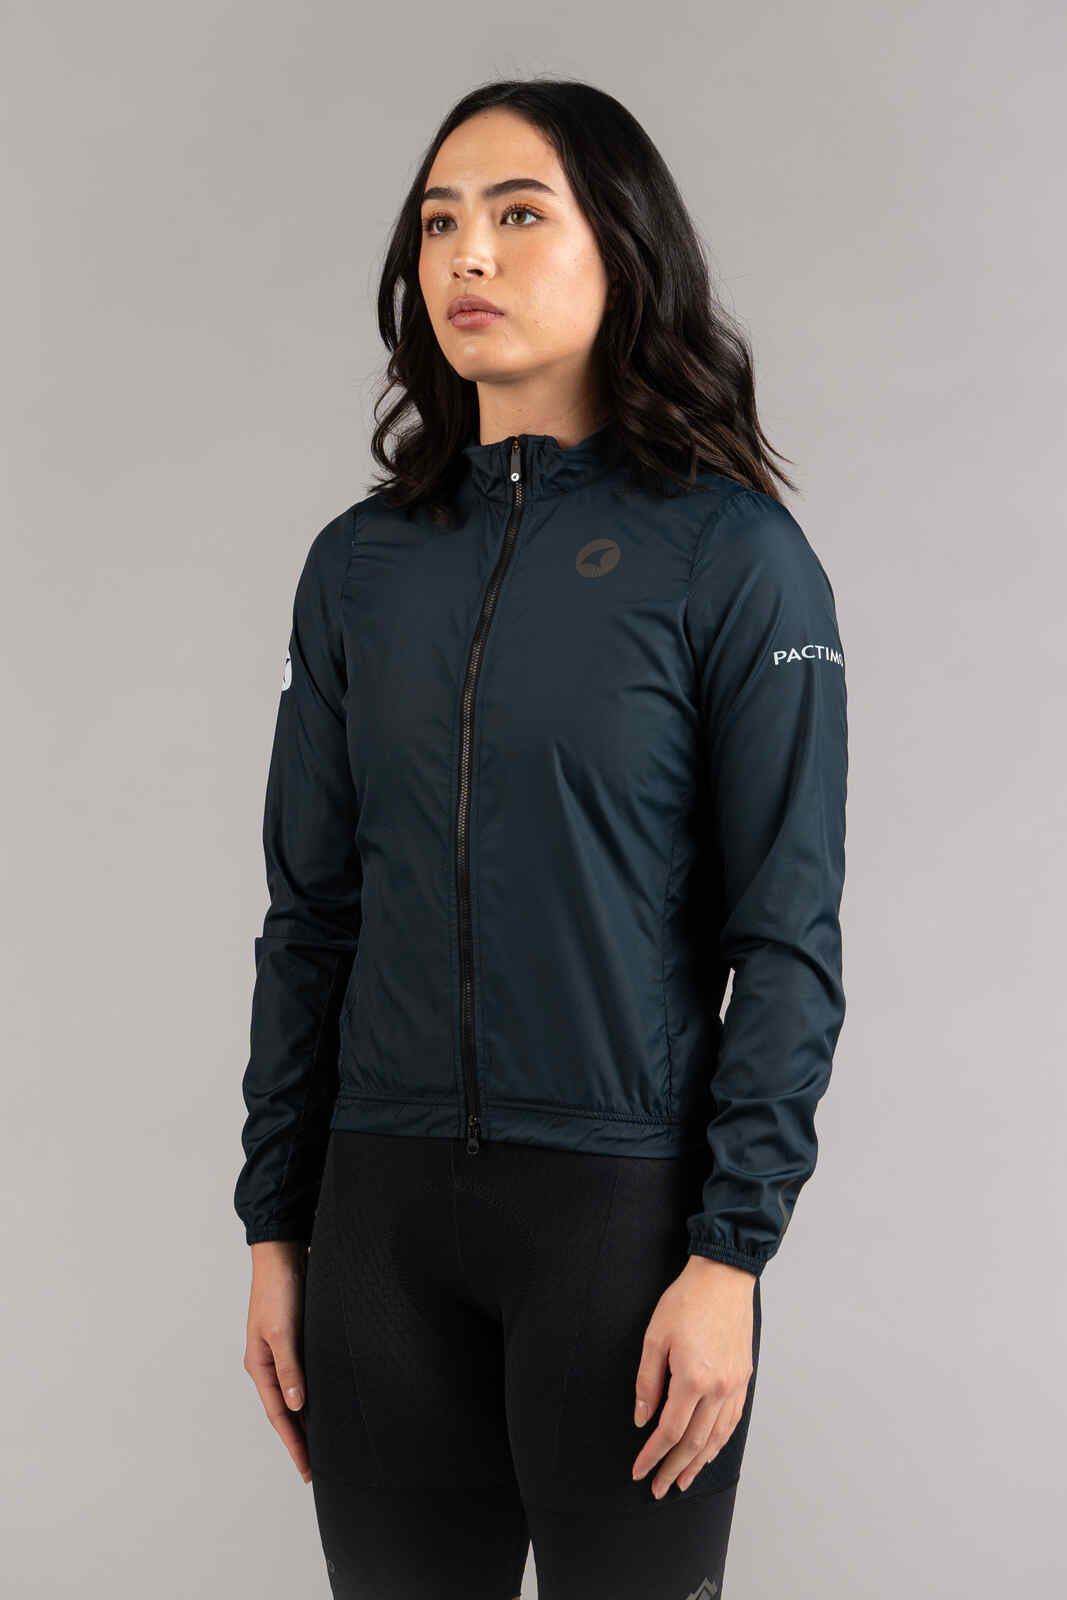 Women's Navy Blue Packable Cycling Wind Jacket - Front View